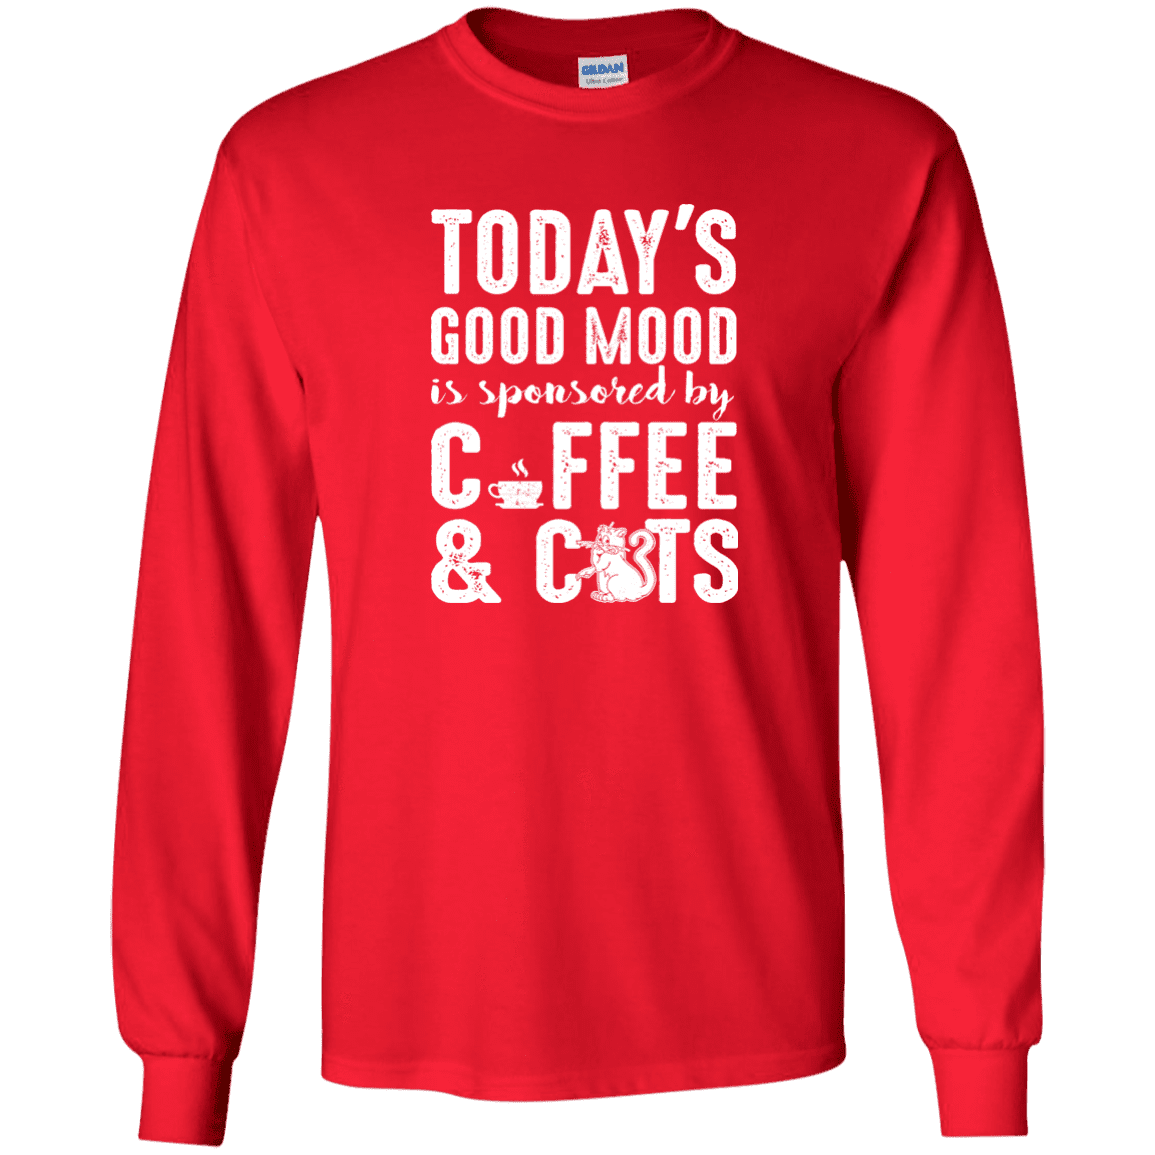 Today's Good Mood Coffee & Cats - Long Sleeve T Shirt.